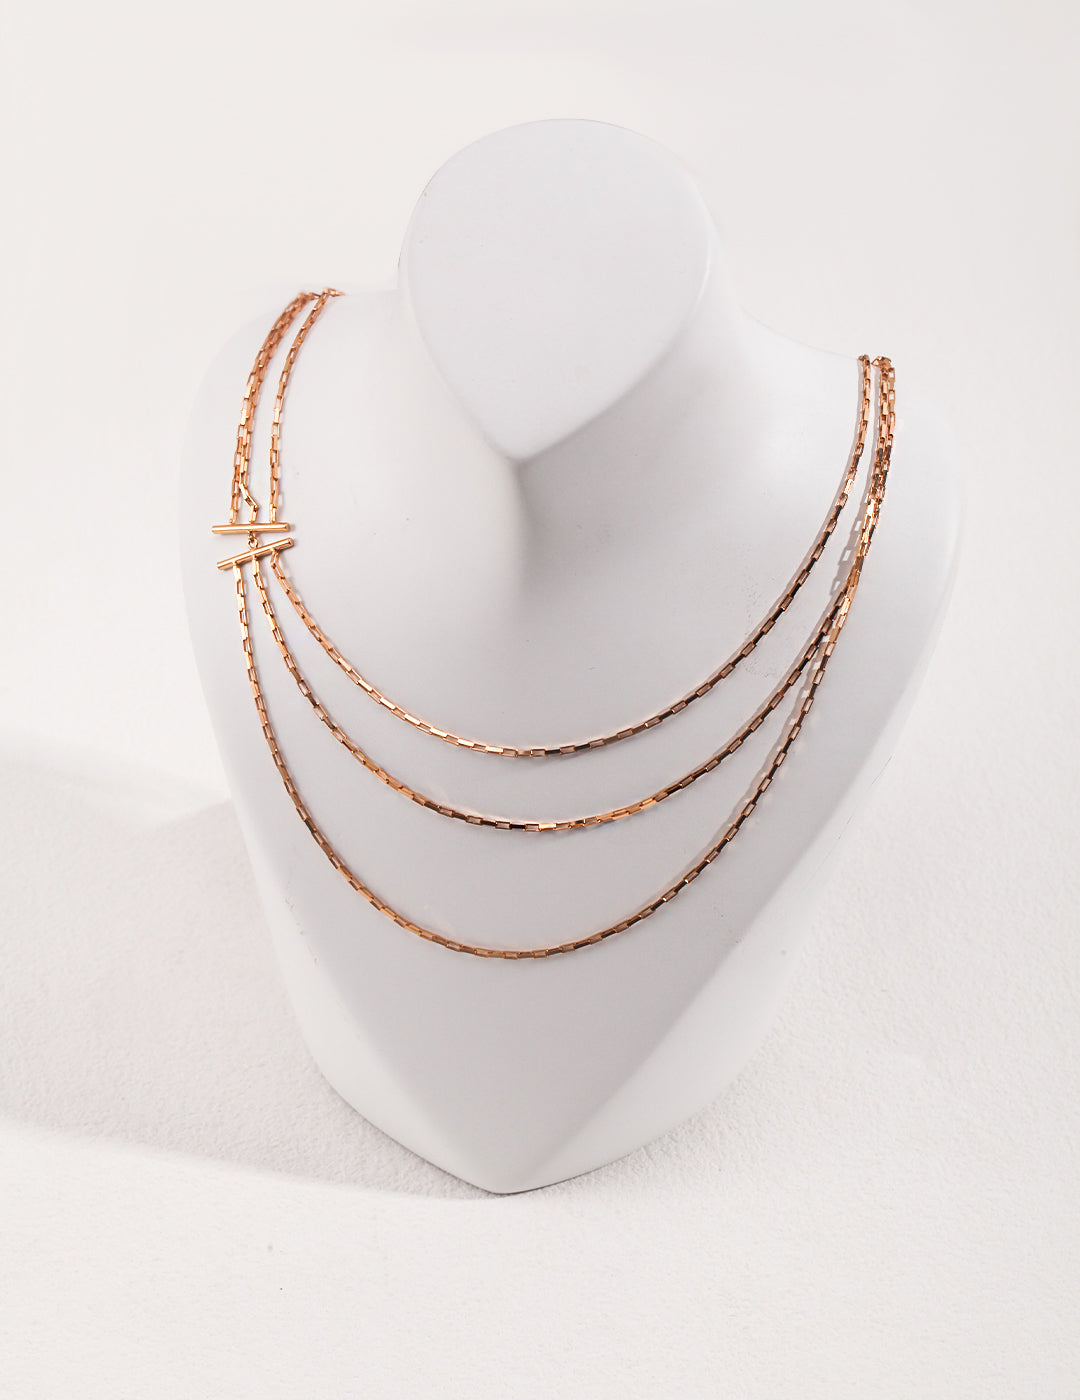 Effortless Chic Necklace